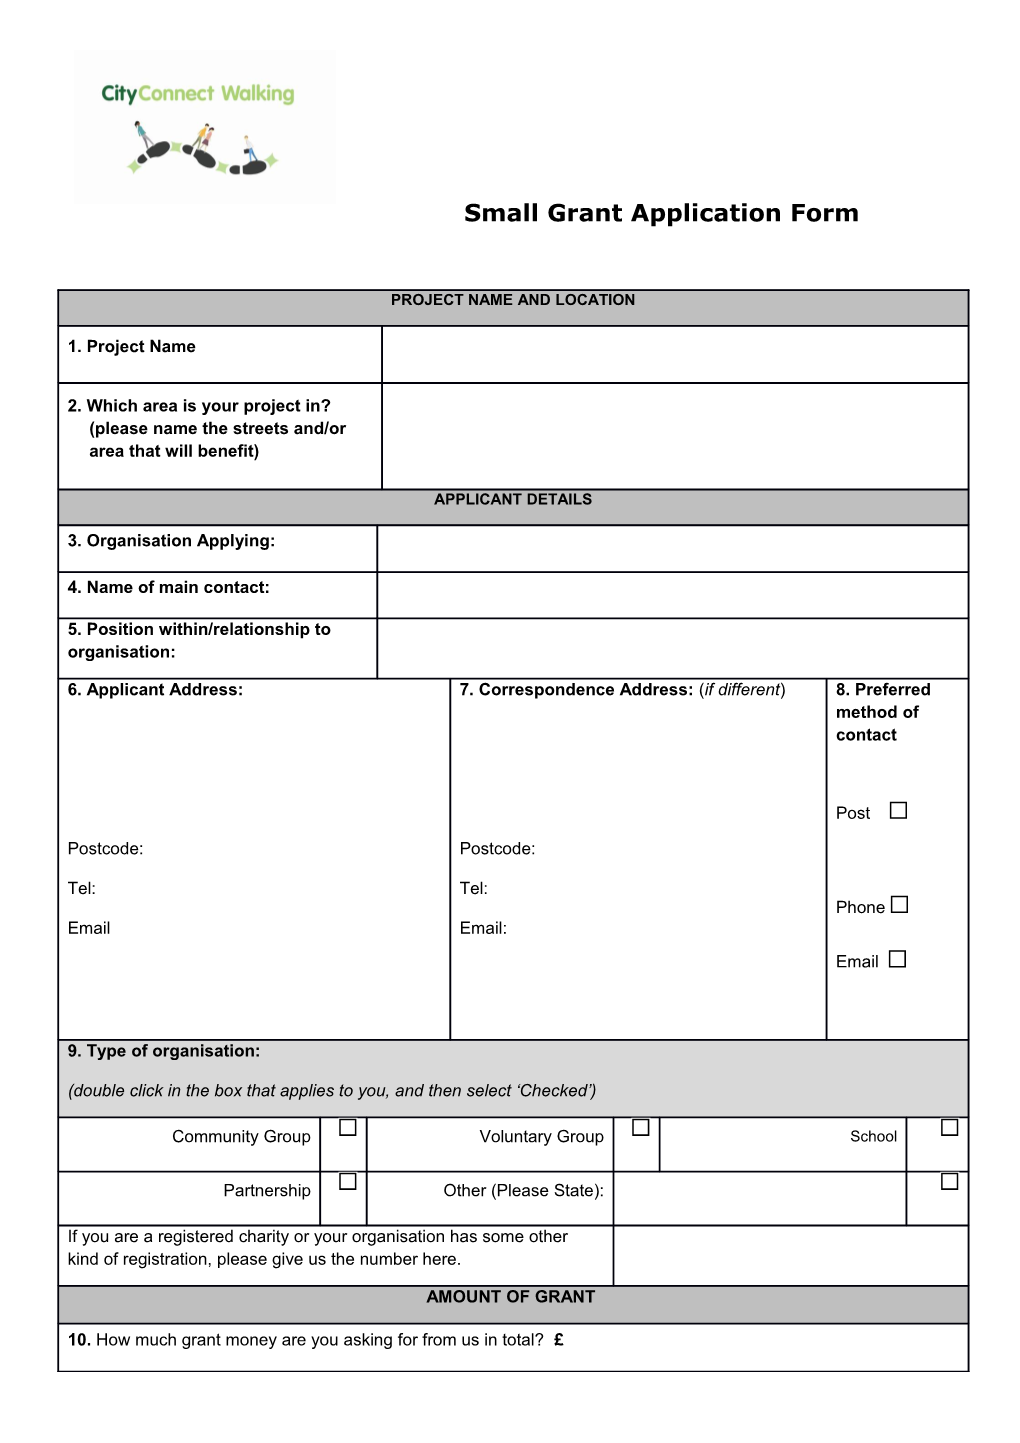 Small Grant Application Form